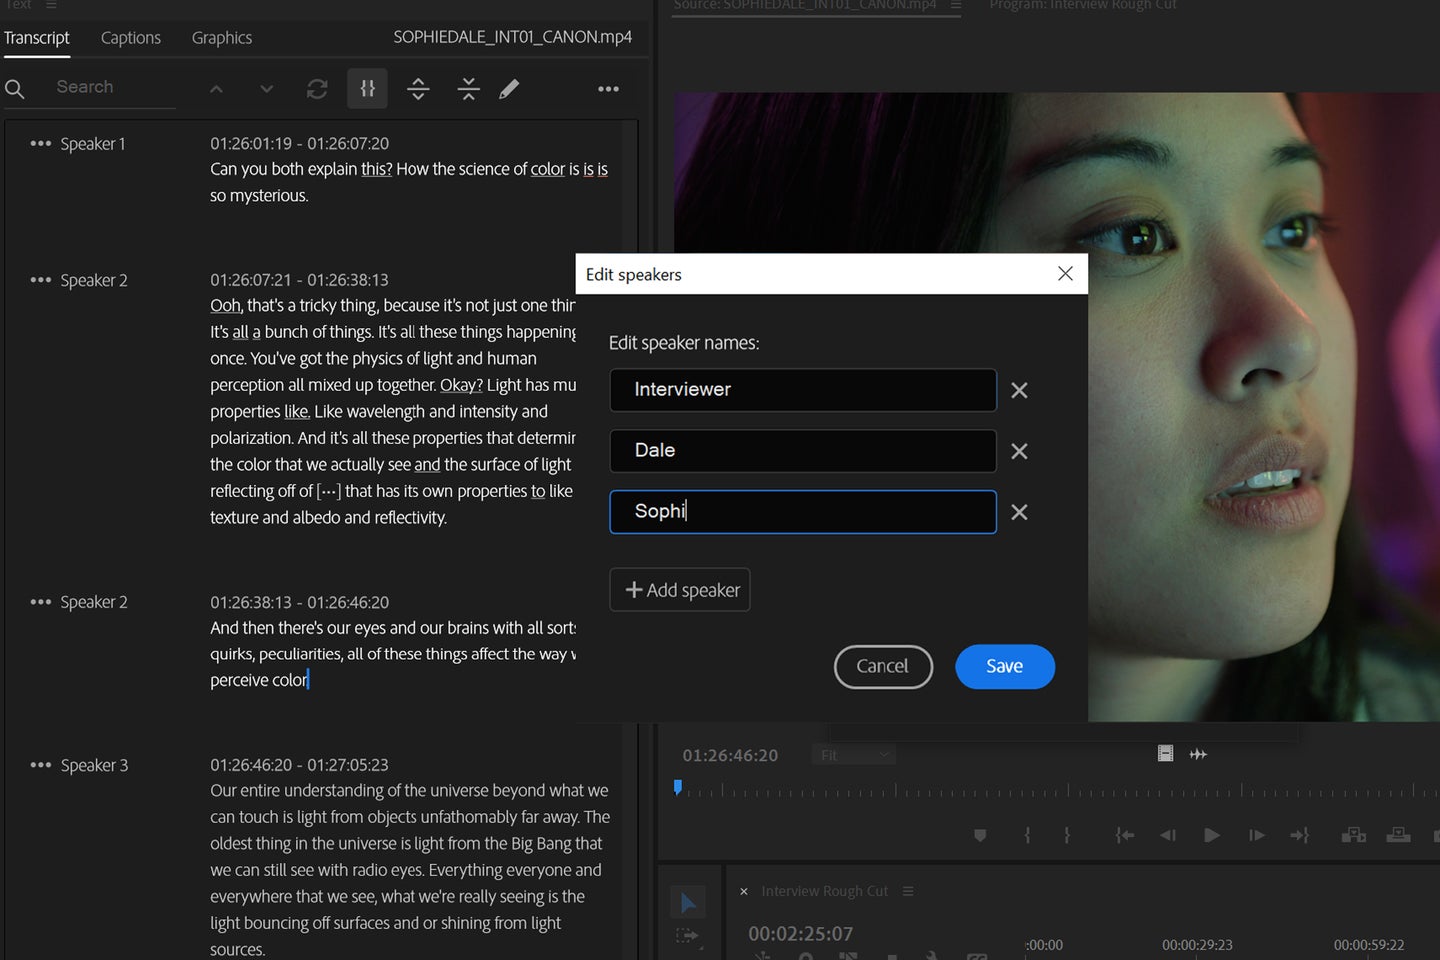 Screenshot of Adobe Premiere Pro text-based editing tool.